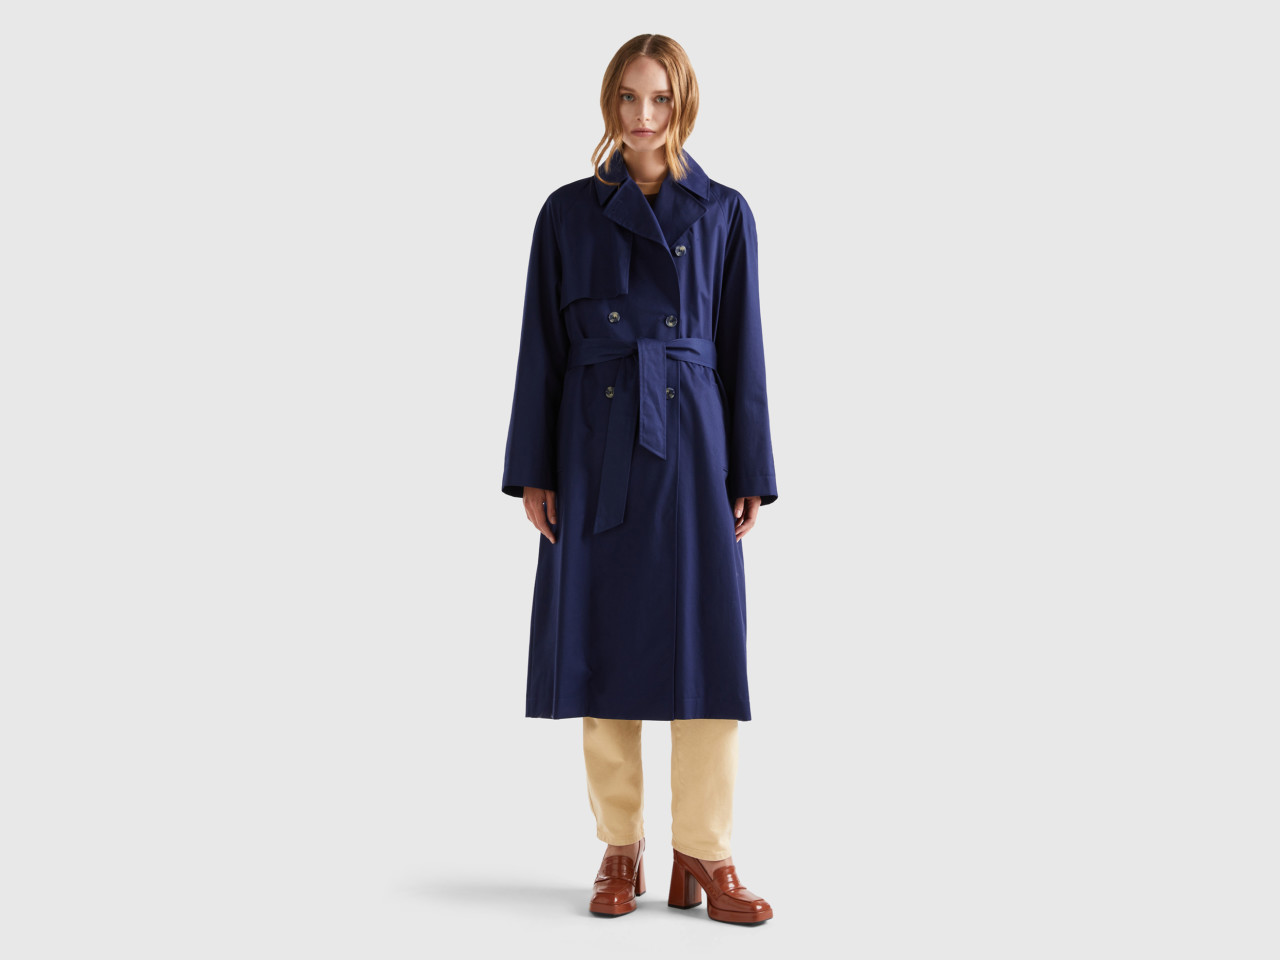 Women's Trench Coats and New Collection 2023 | Benetton